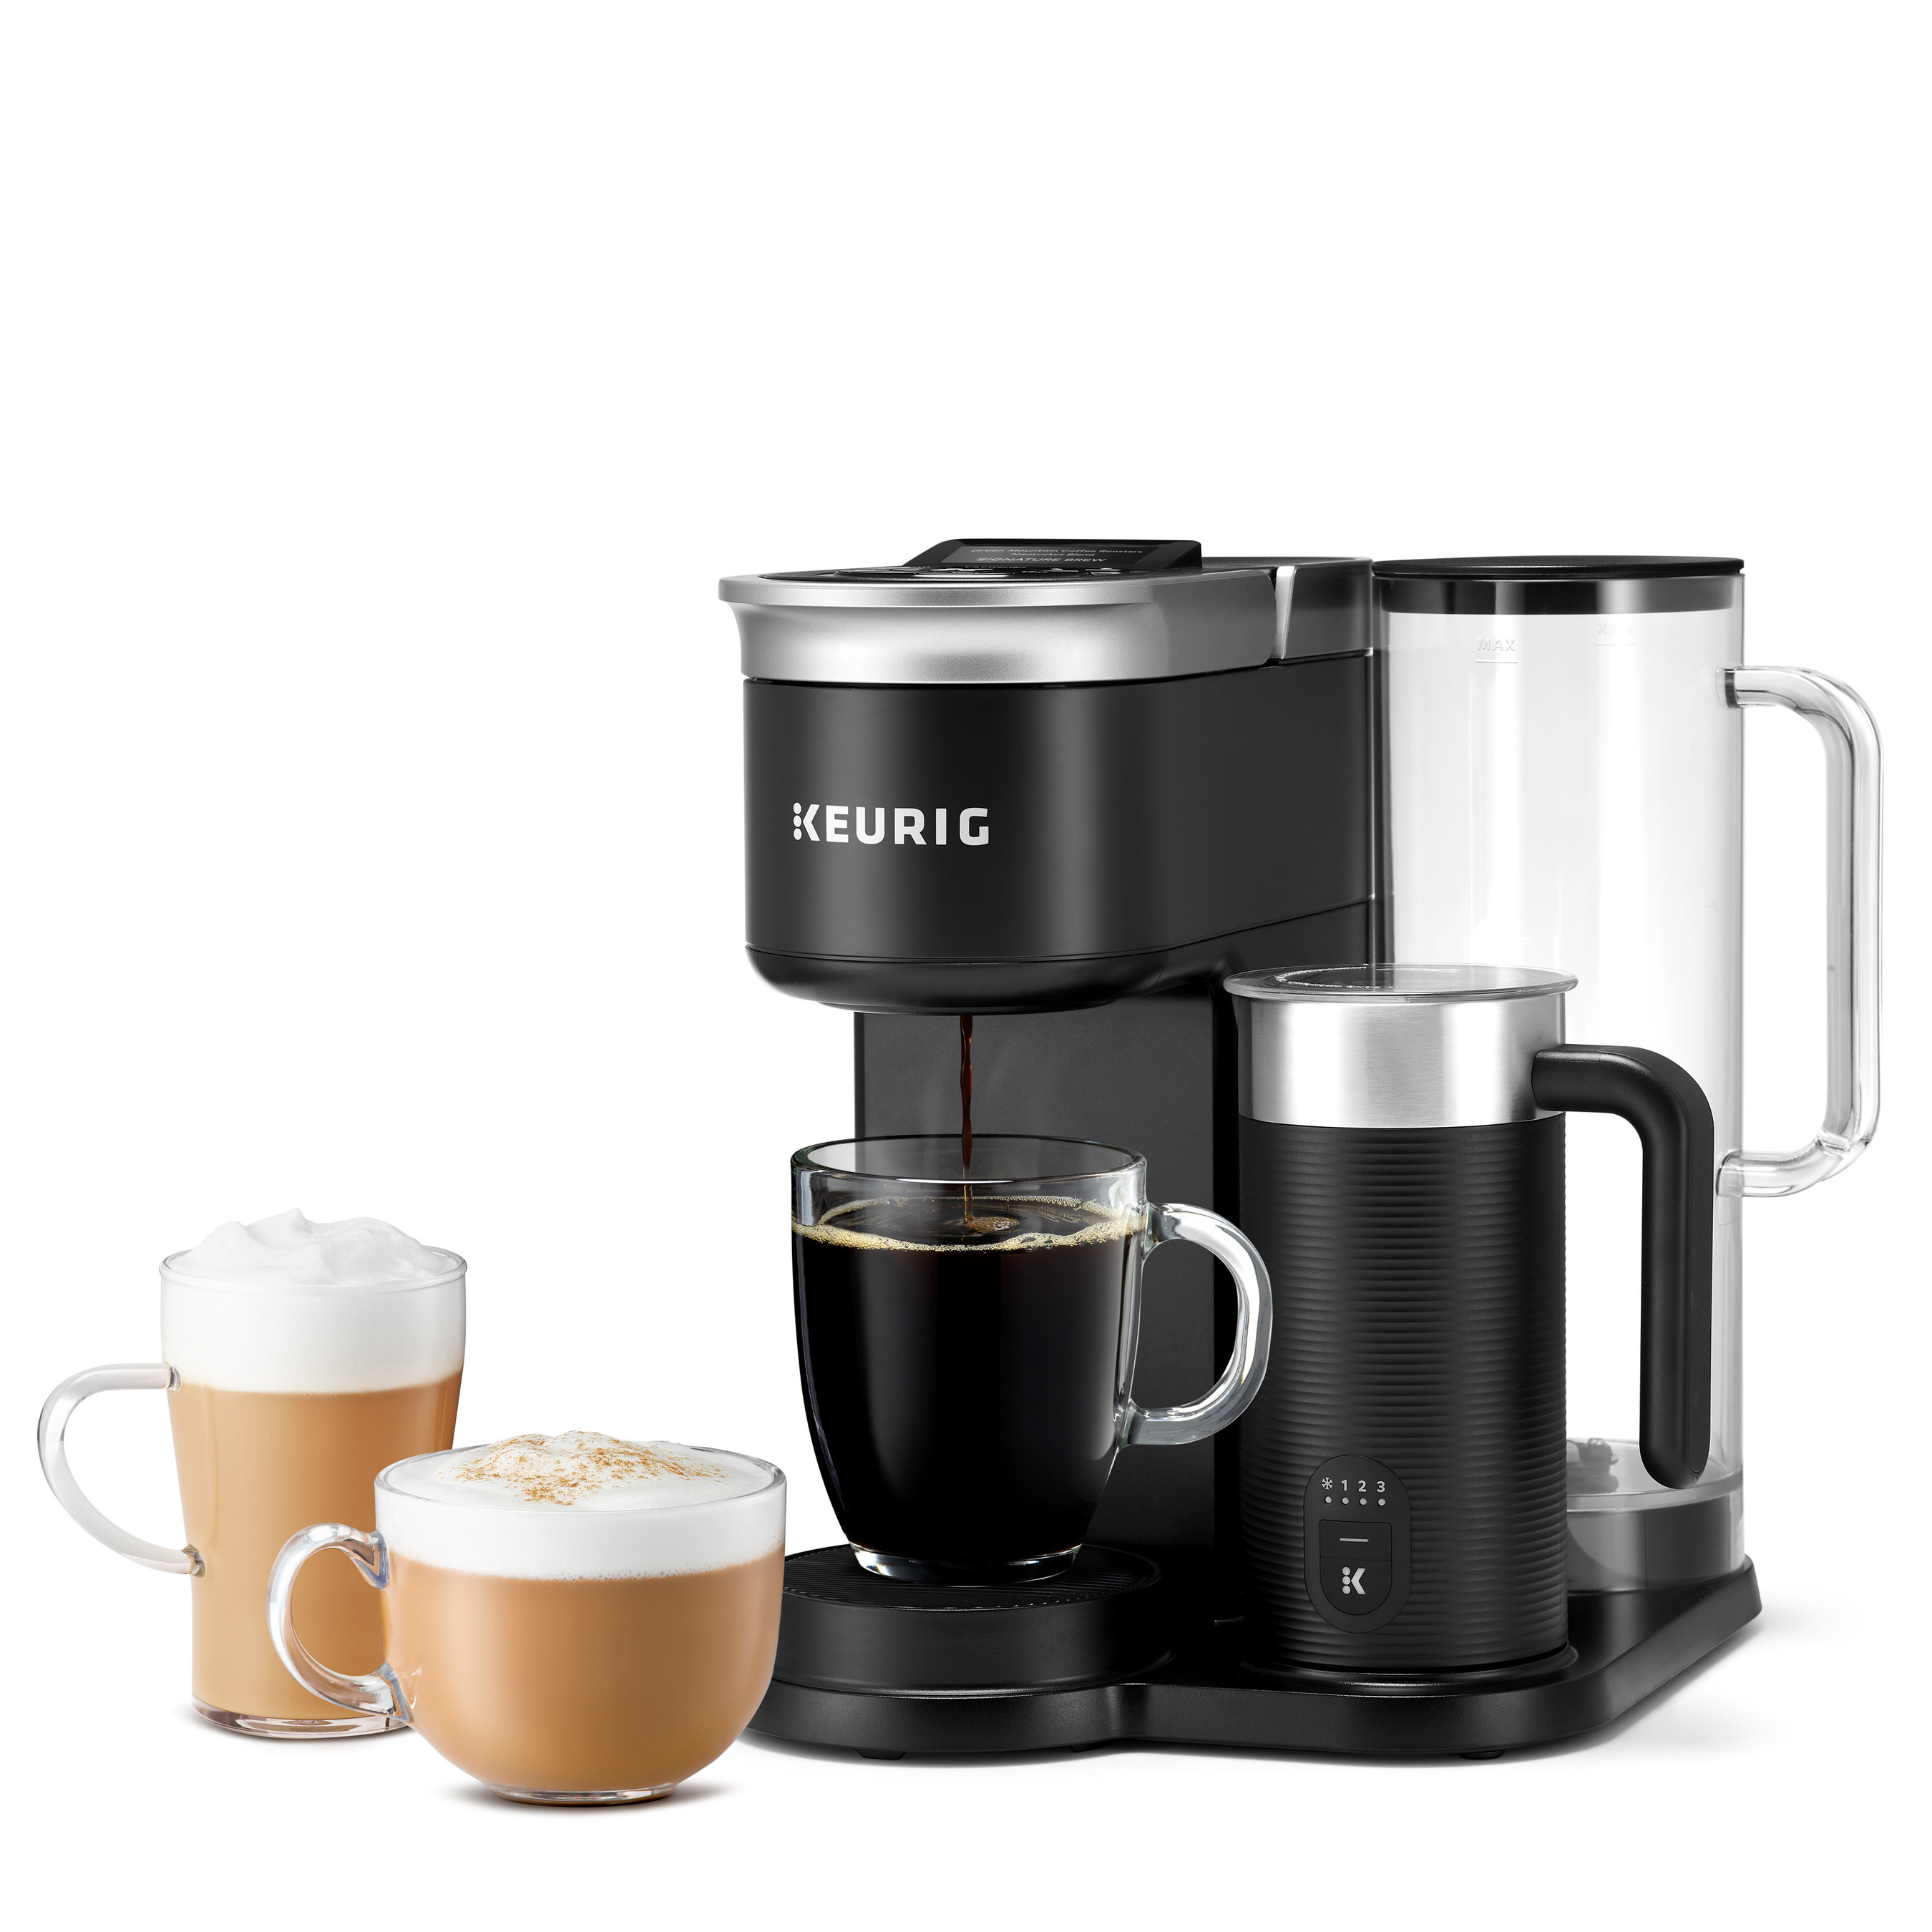 how does the keurig k cafe smart works｜TikTok Search